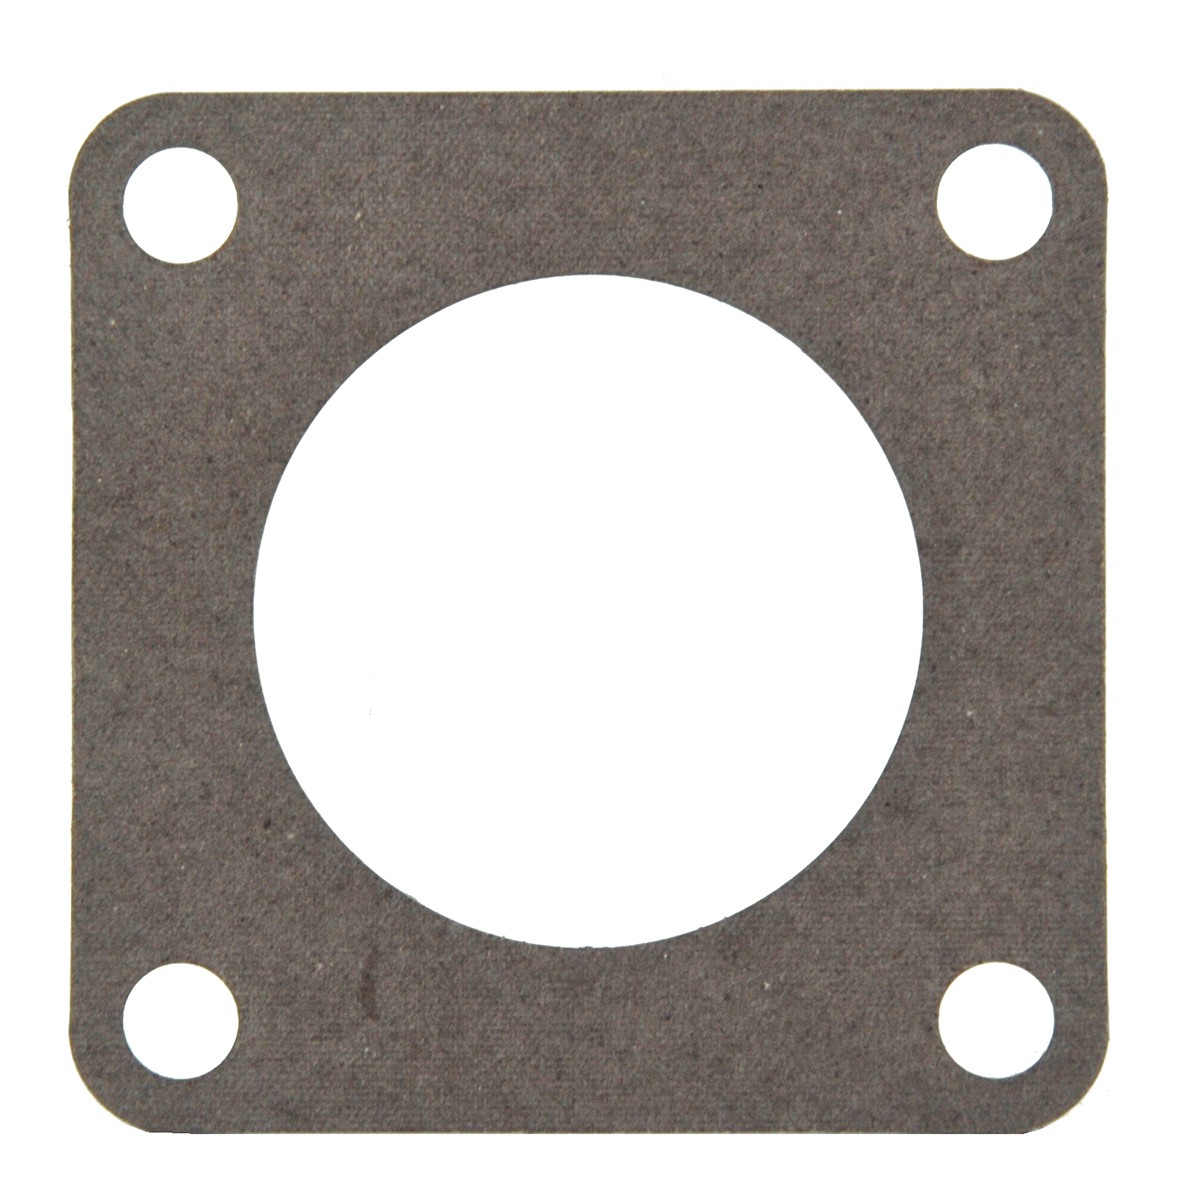 Gasket for end cap 80 x 80 x 1.00 mm / LS XJ25 / 30A1100101 / 40223731